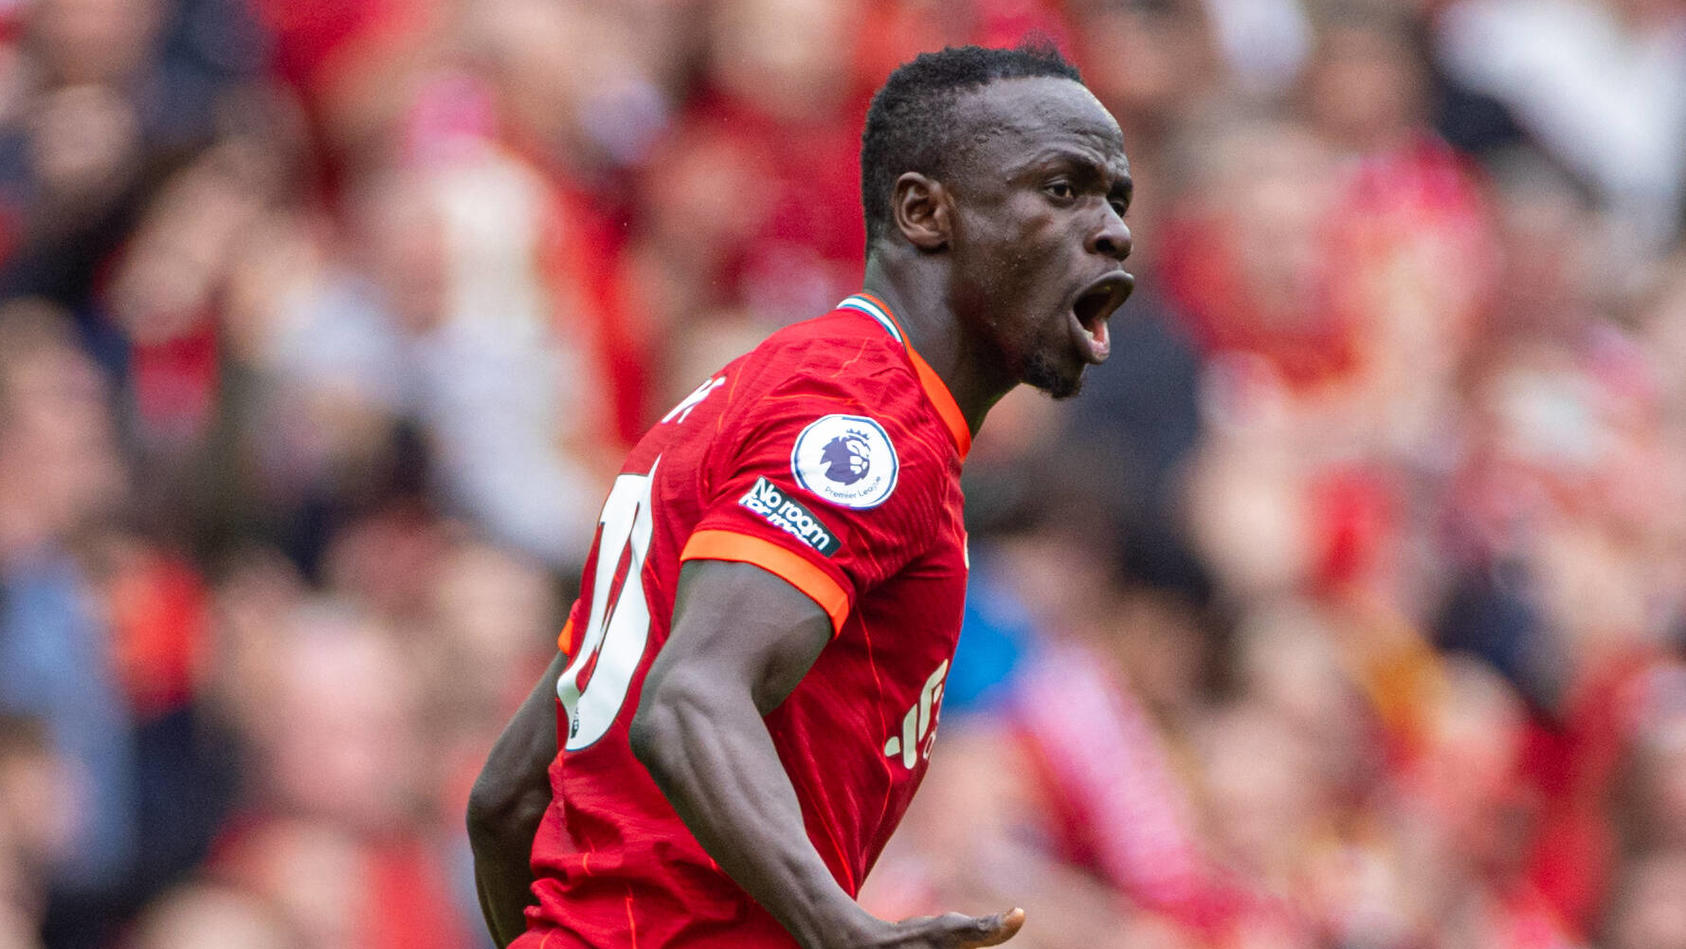  220523 -- LIVERPOOL, May 23, 2022  -- Liverpool s Sadio Mane celebrates after scoring the first equalising goal during the English Premier League match between Liverpool and Wolverhampton Wanderers in Liverpool, Britain, on May 22, 2022.  FOR EDITOR